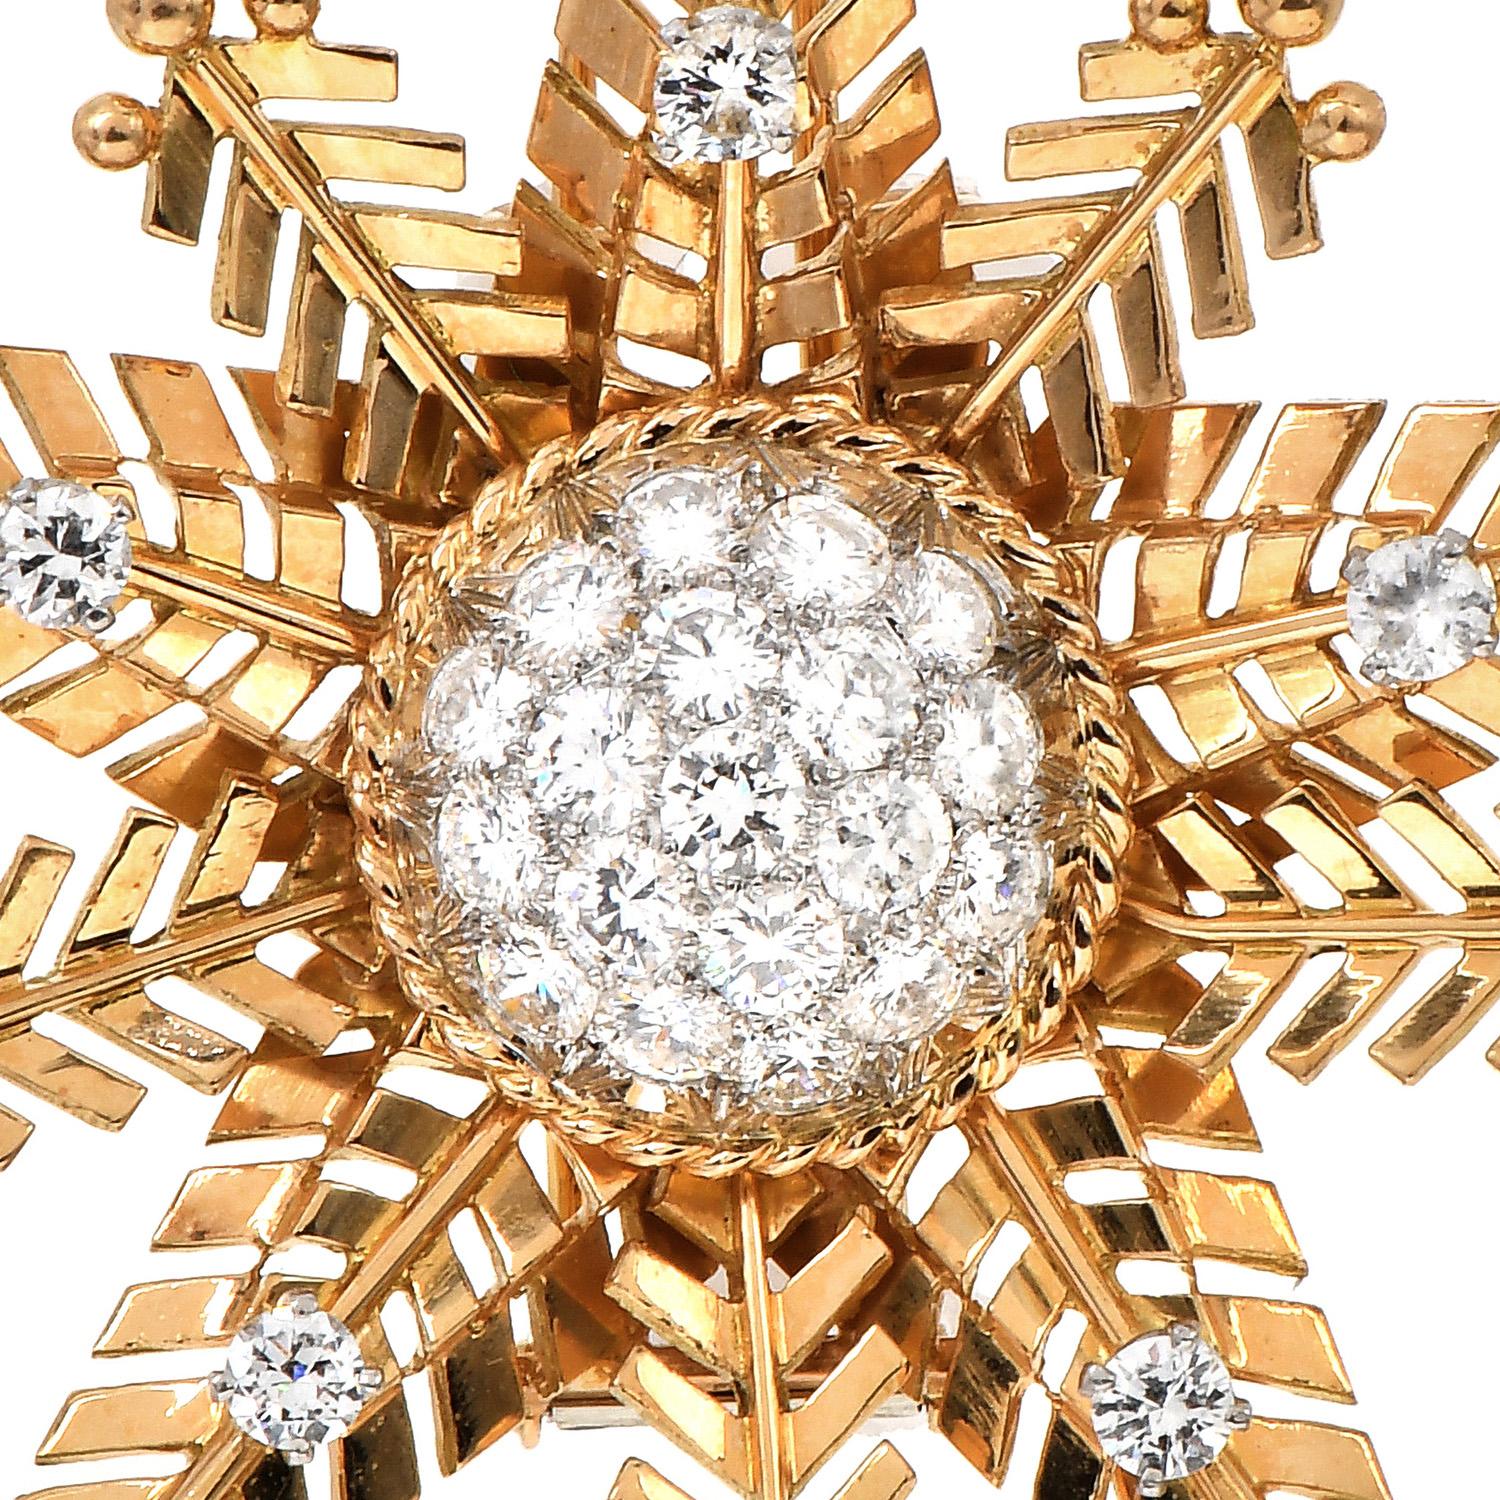 This exquisite Vintage High Quality made Diamond Snowfleks Brooch pin is made of solid 18K Rose gold. This stunning 1960's pin is set with round-cut diamonds weighing approximately 2.20 carats, F-G color, VVS clarity, and Platinum. Hallmarked